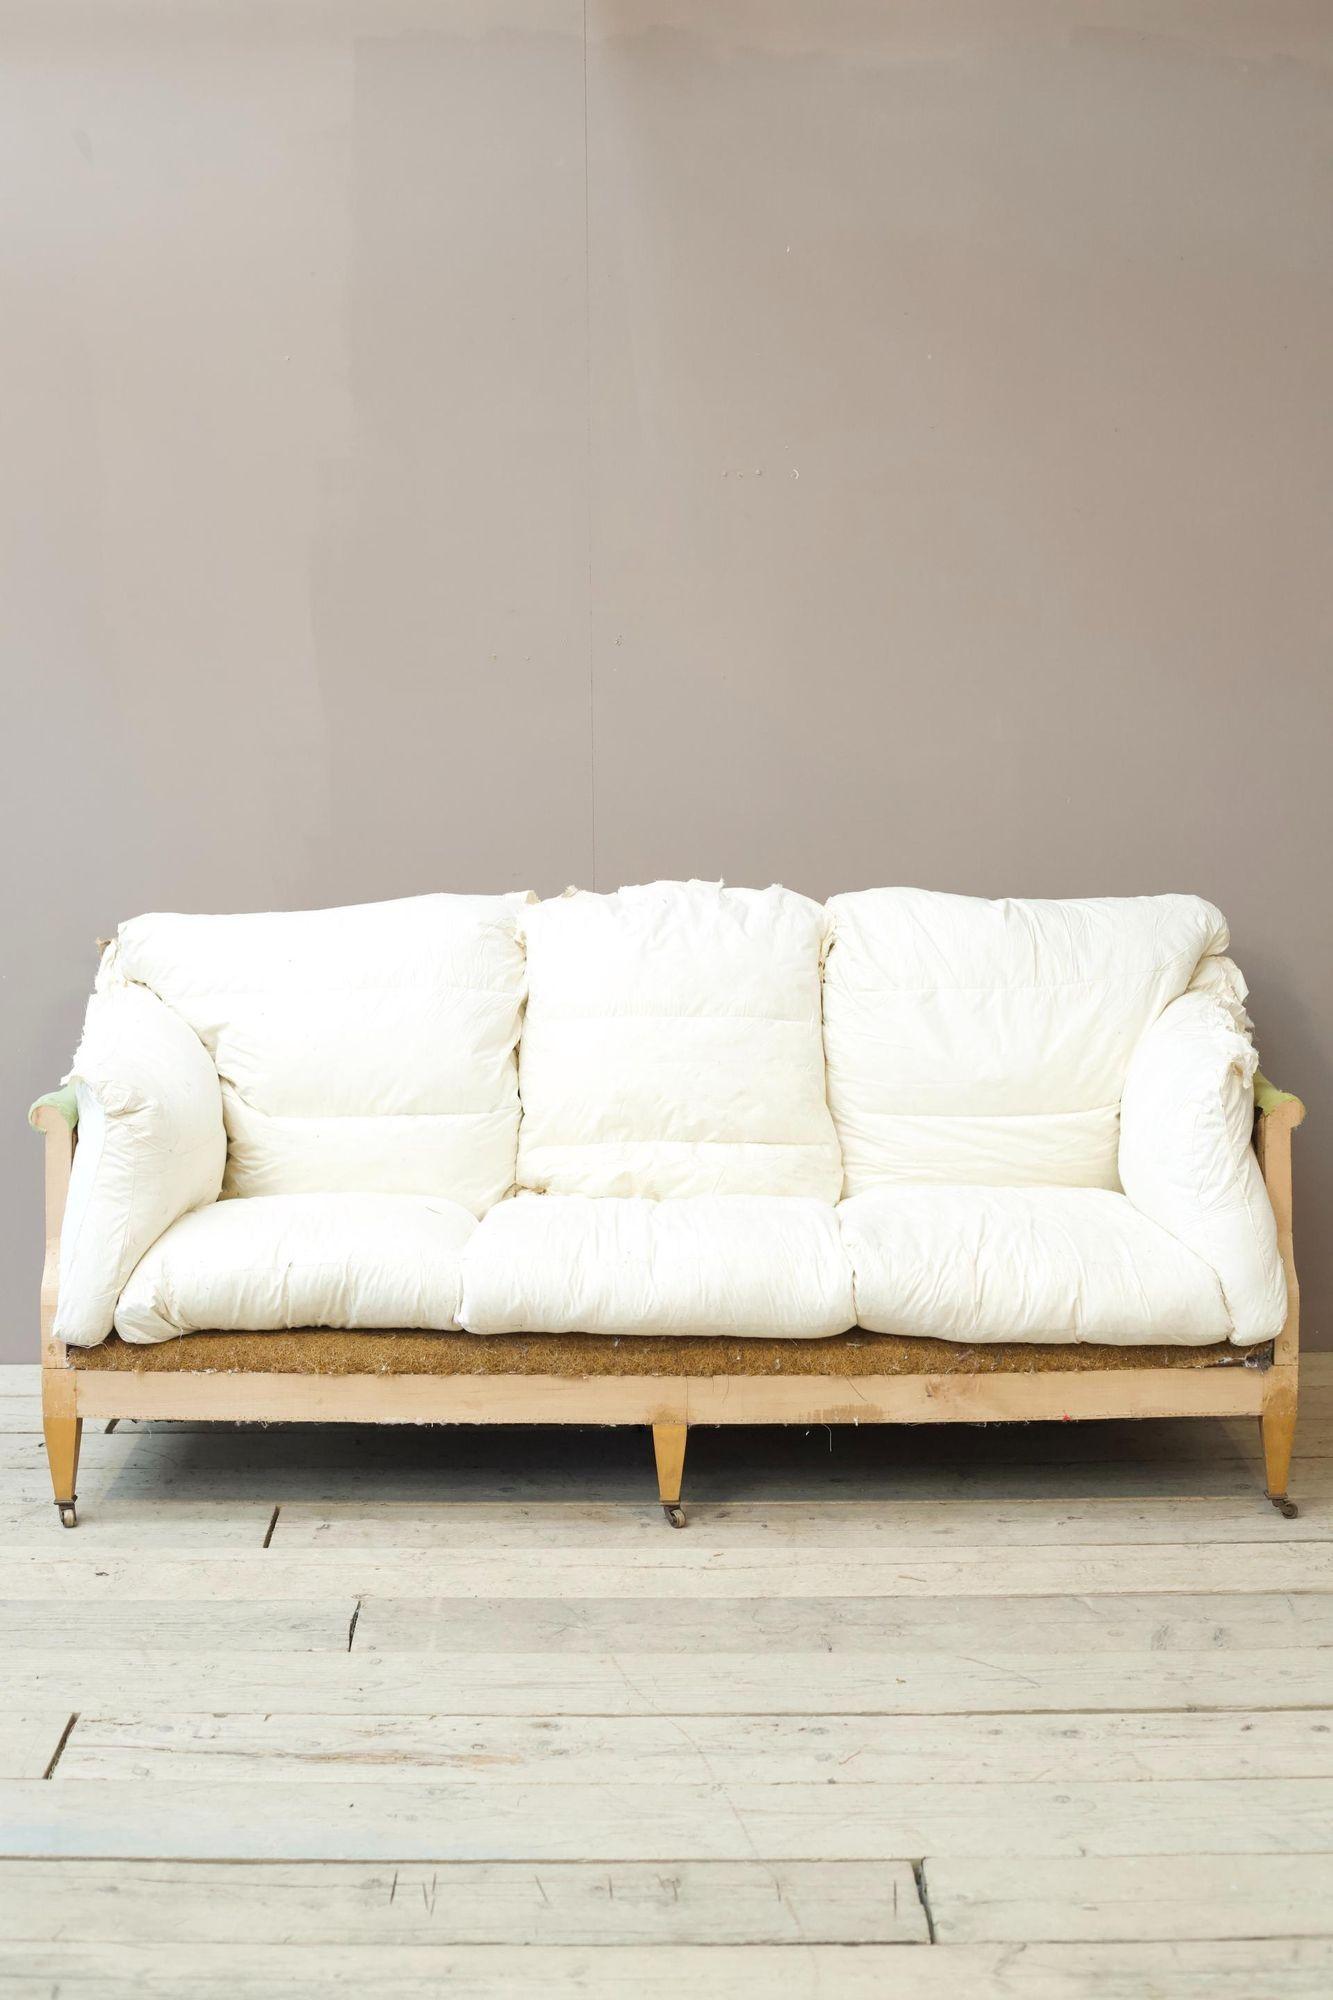 20th century country house sofa by William Yeoward